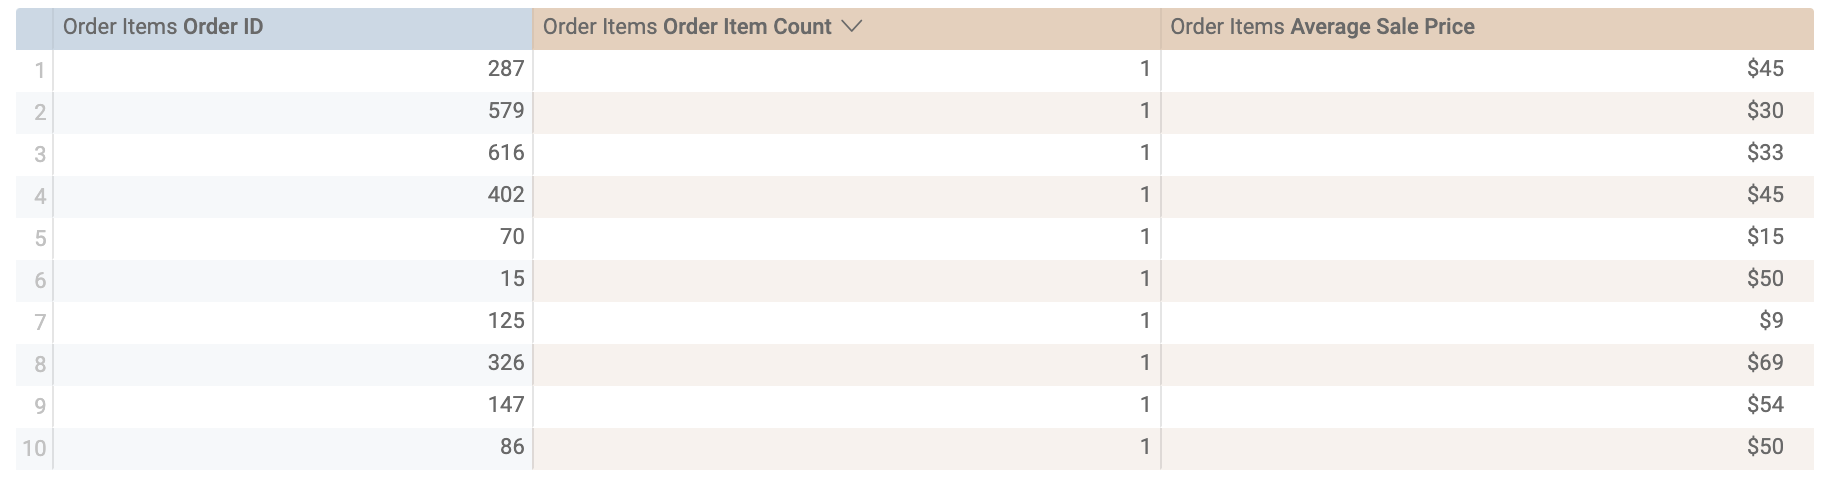 The order items list, divided into three categories: Order ID, Order Item Count, and Average Sale Price.